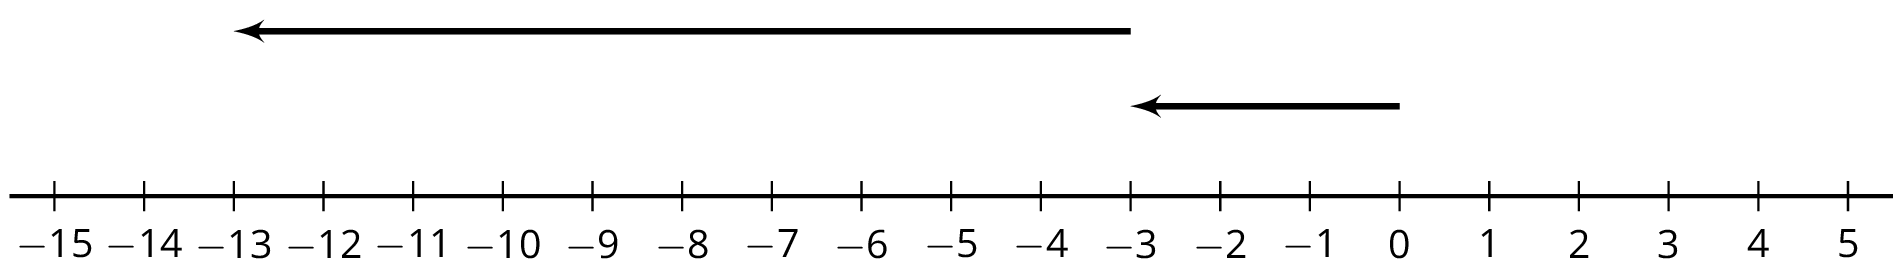 A number line with the numbers negative 10 through 10 indicated. An arrow starts at negative 3, points to the left, and ends at negative 13. A second arrow starts at 0, points to the left, and ends at negative 3.